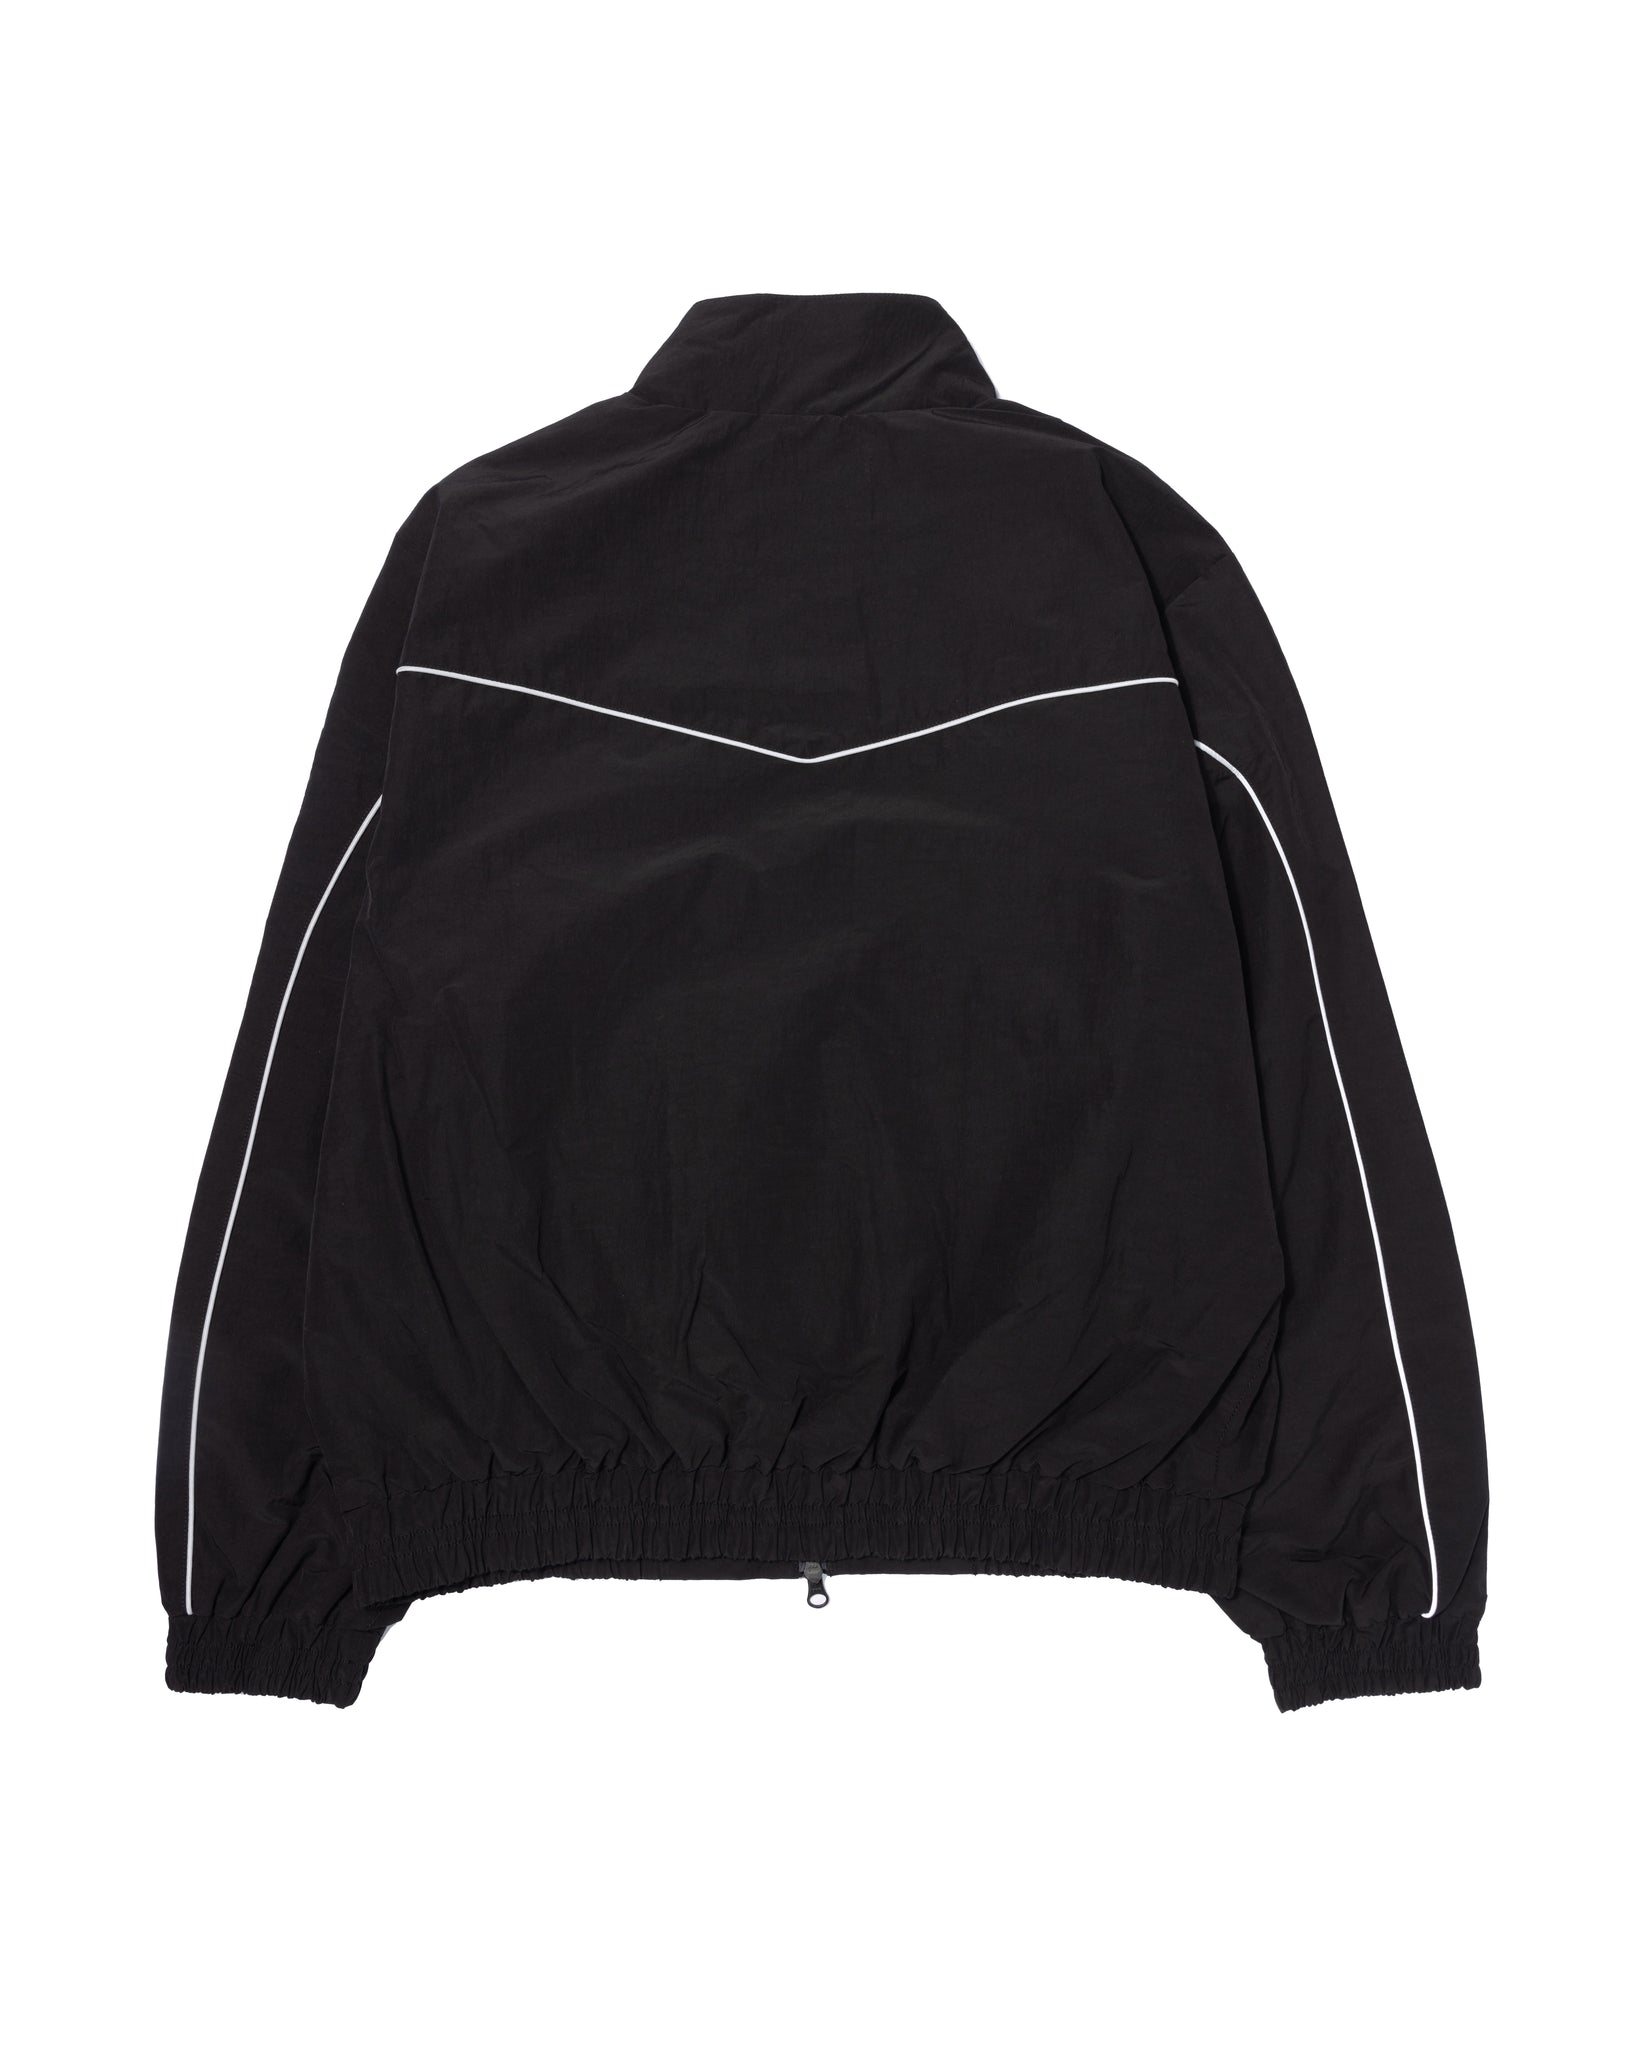 WESTERN TRACK TOP